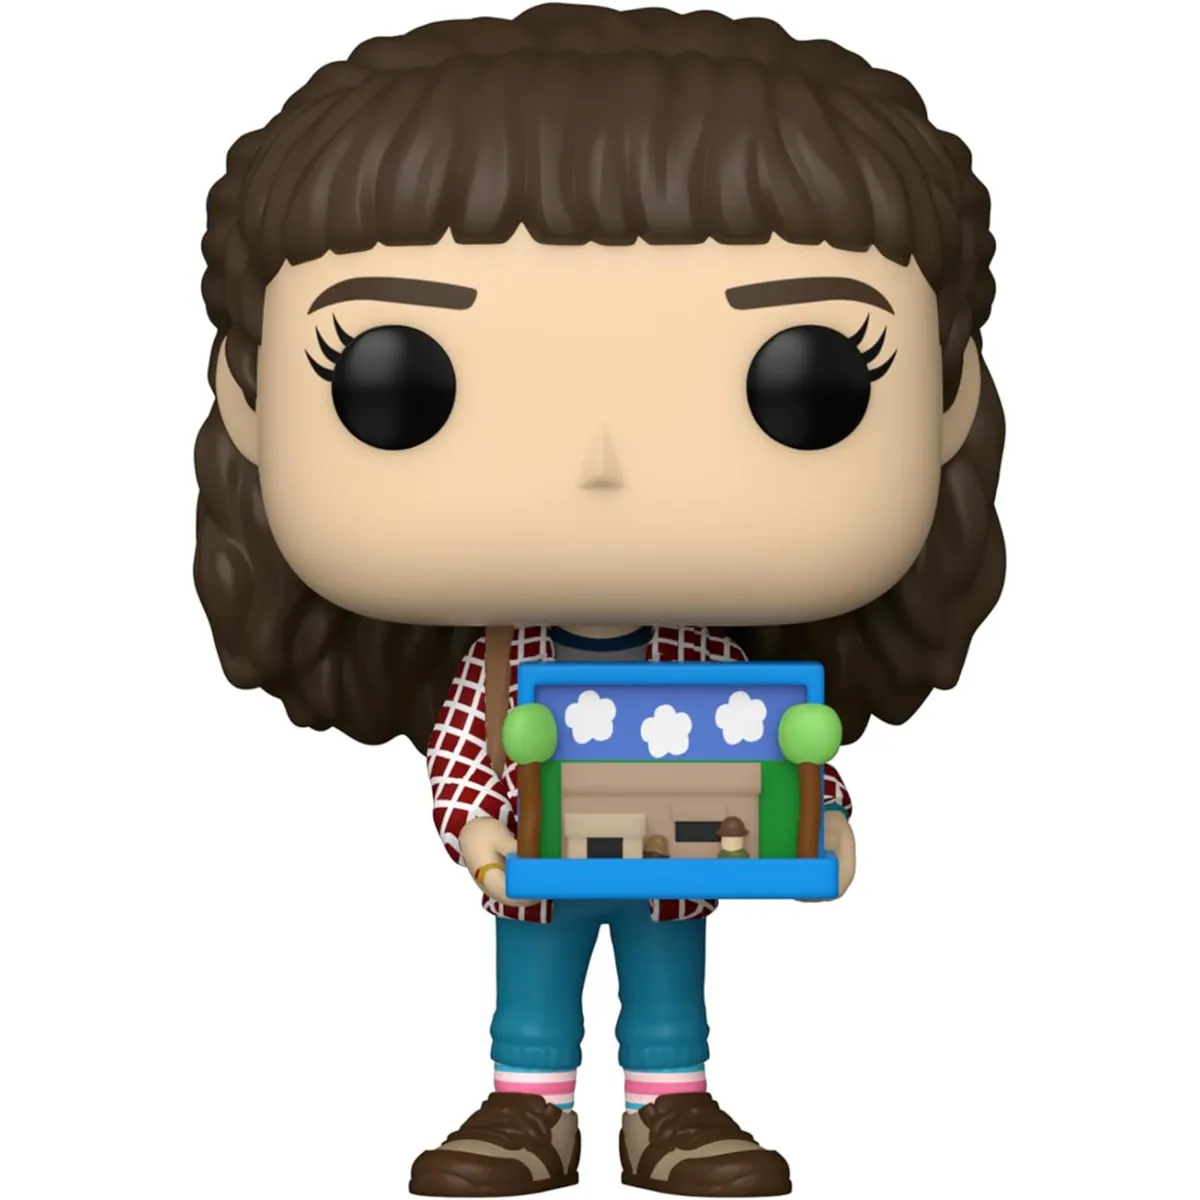 FK65639 Funko Pop! Television - Stranger Things - Eleven with Diorama Collectable Vinyl Figure